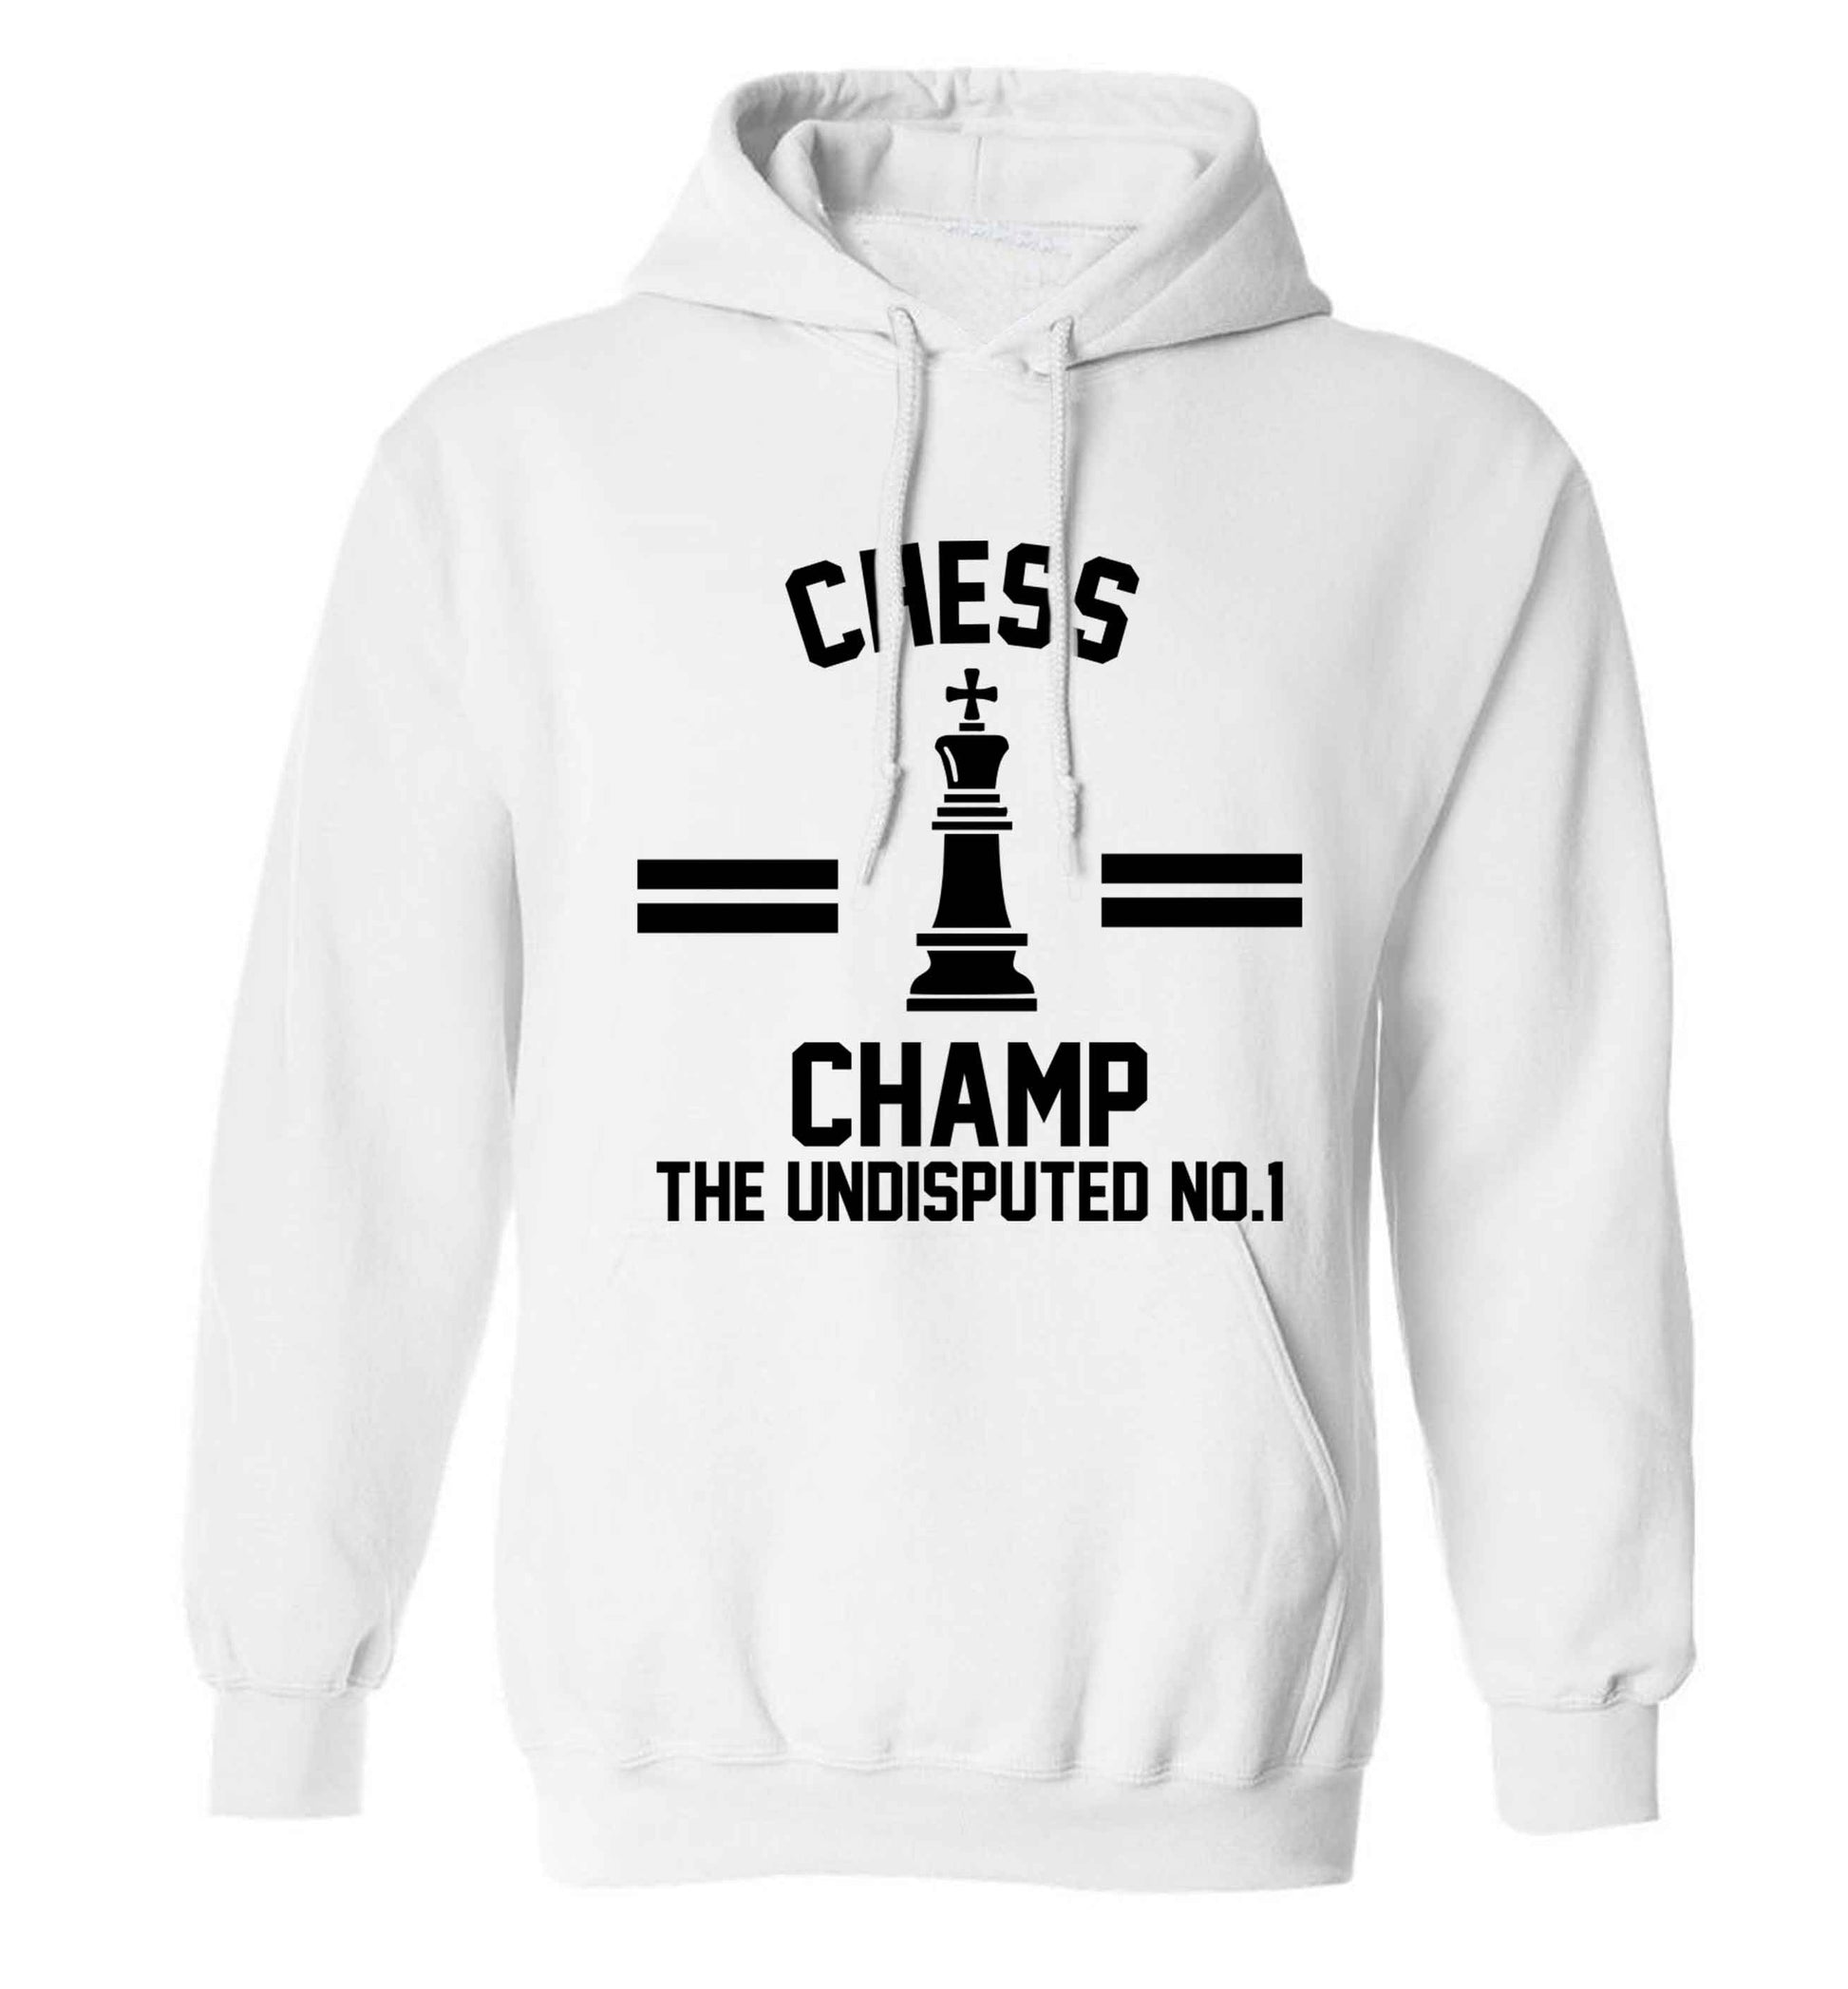 Undisputed chess championship no.1  adults unisex white hoodie 2XL